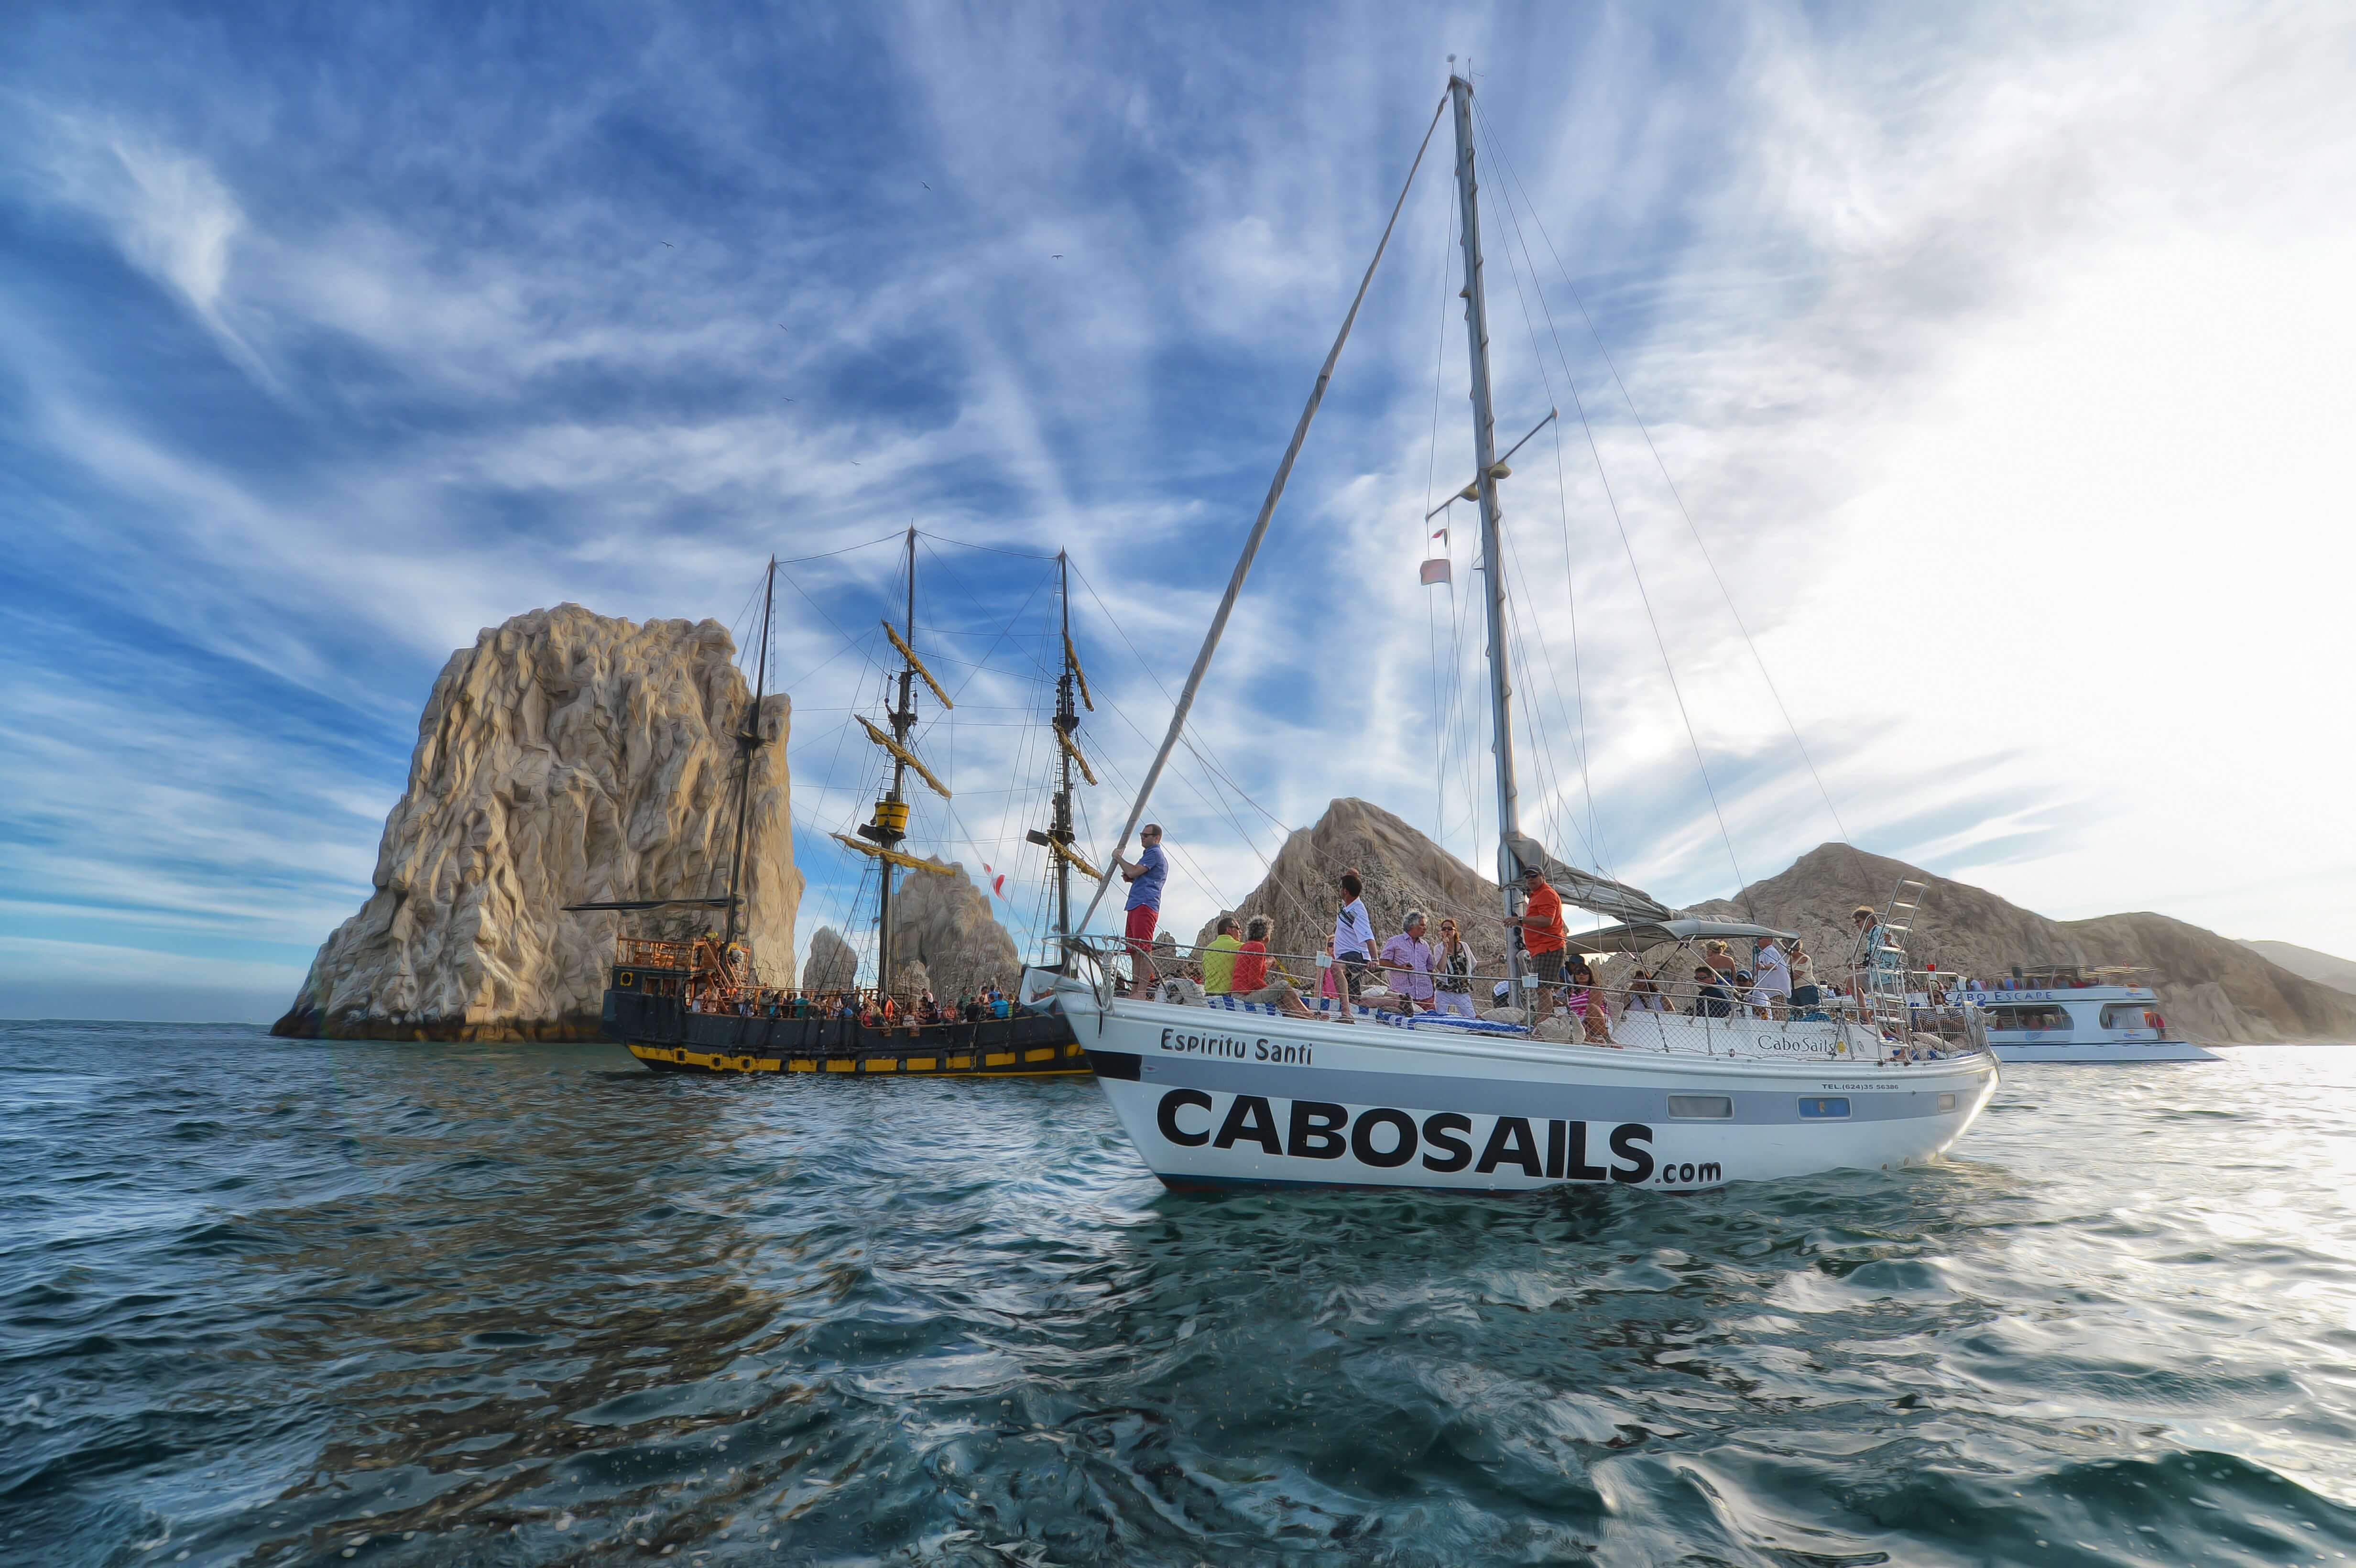 things to do in cabo san lucas, things to do in cabo, cabo adventures, cabo san lucas things to do, los cabos san lucas, what to do in cabo san lucas, mexico cabo, cabo san lucas arch